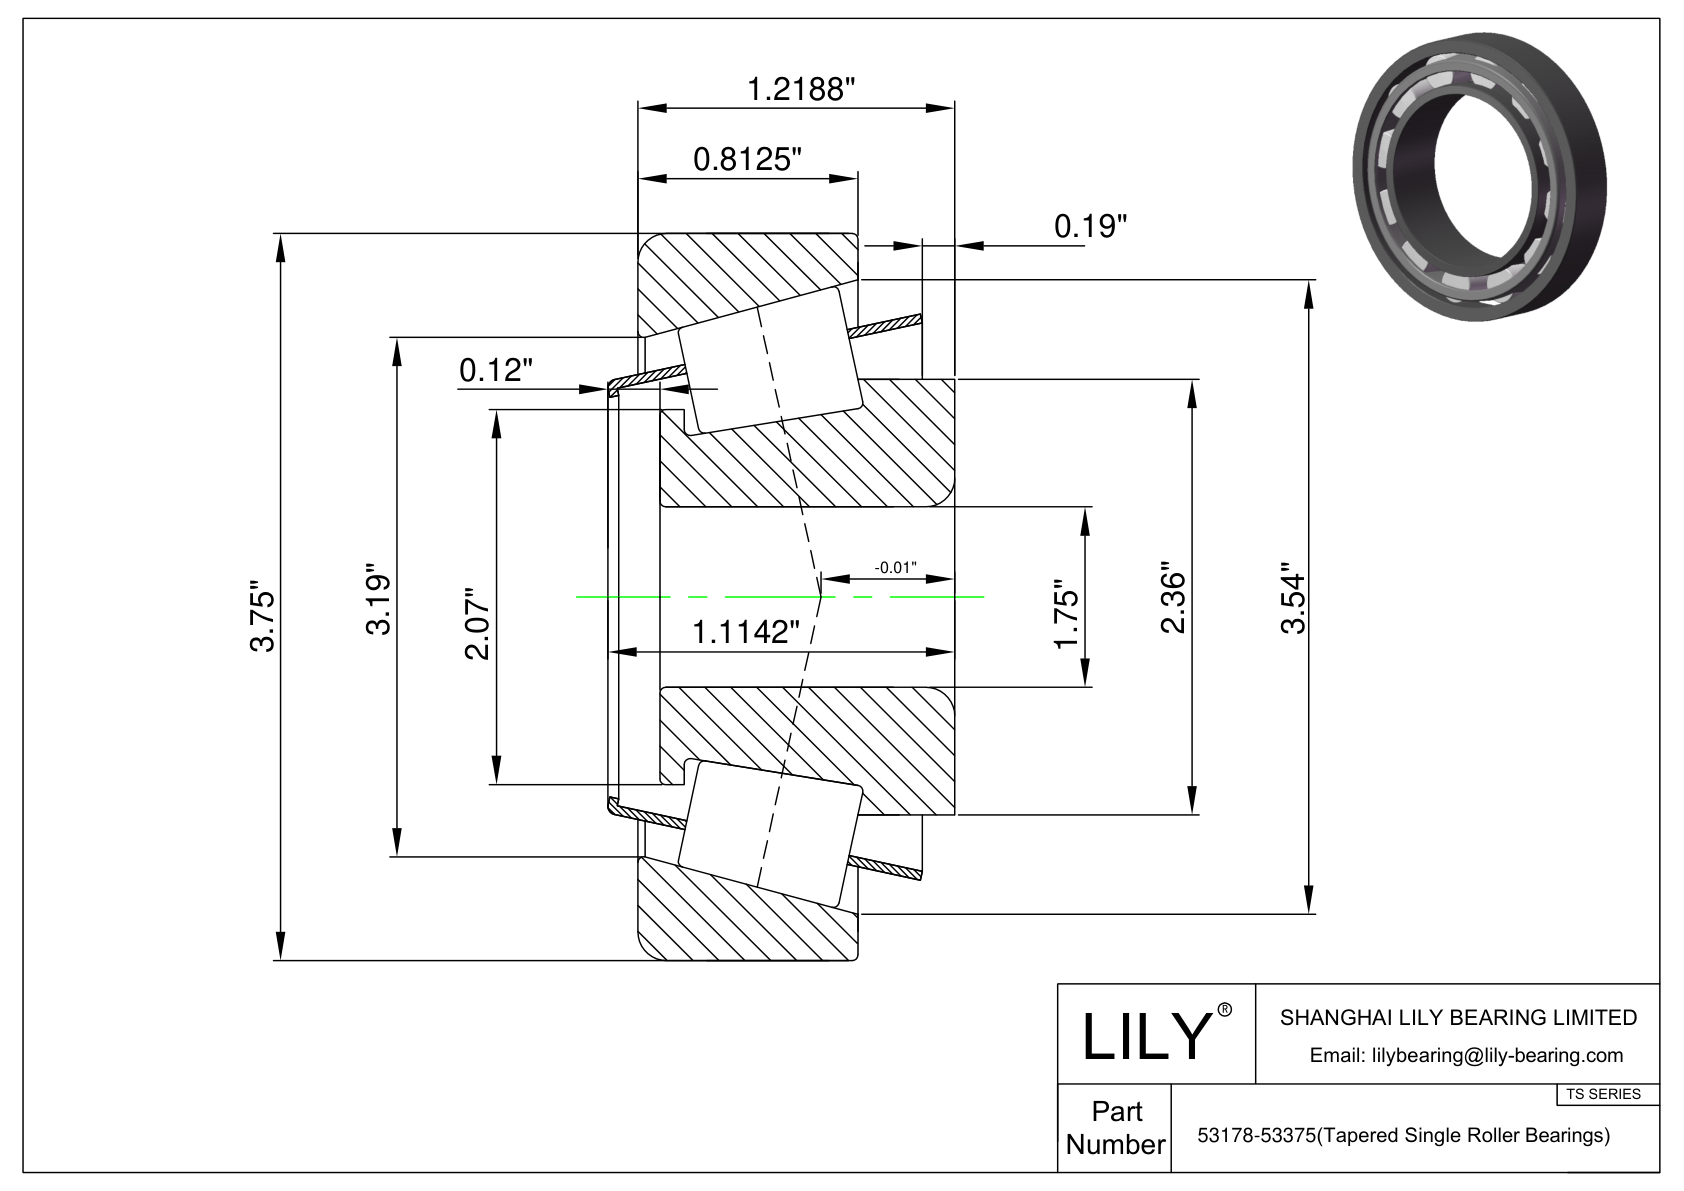 53178-53375 TS (Tapered Single Roller Bearings) (Imperial) cad drawing